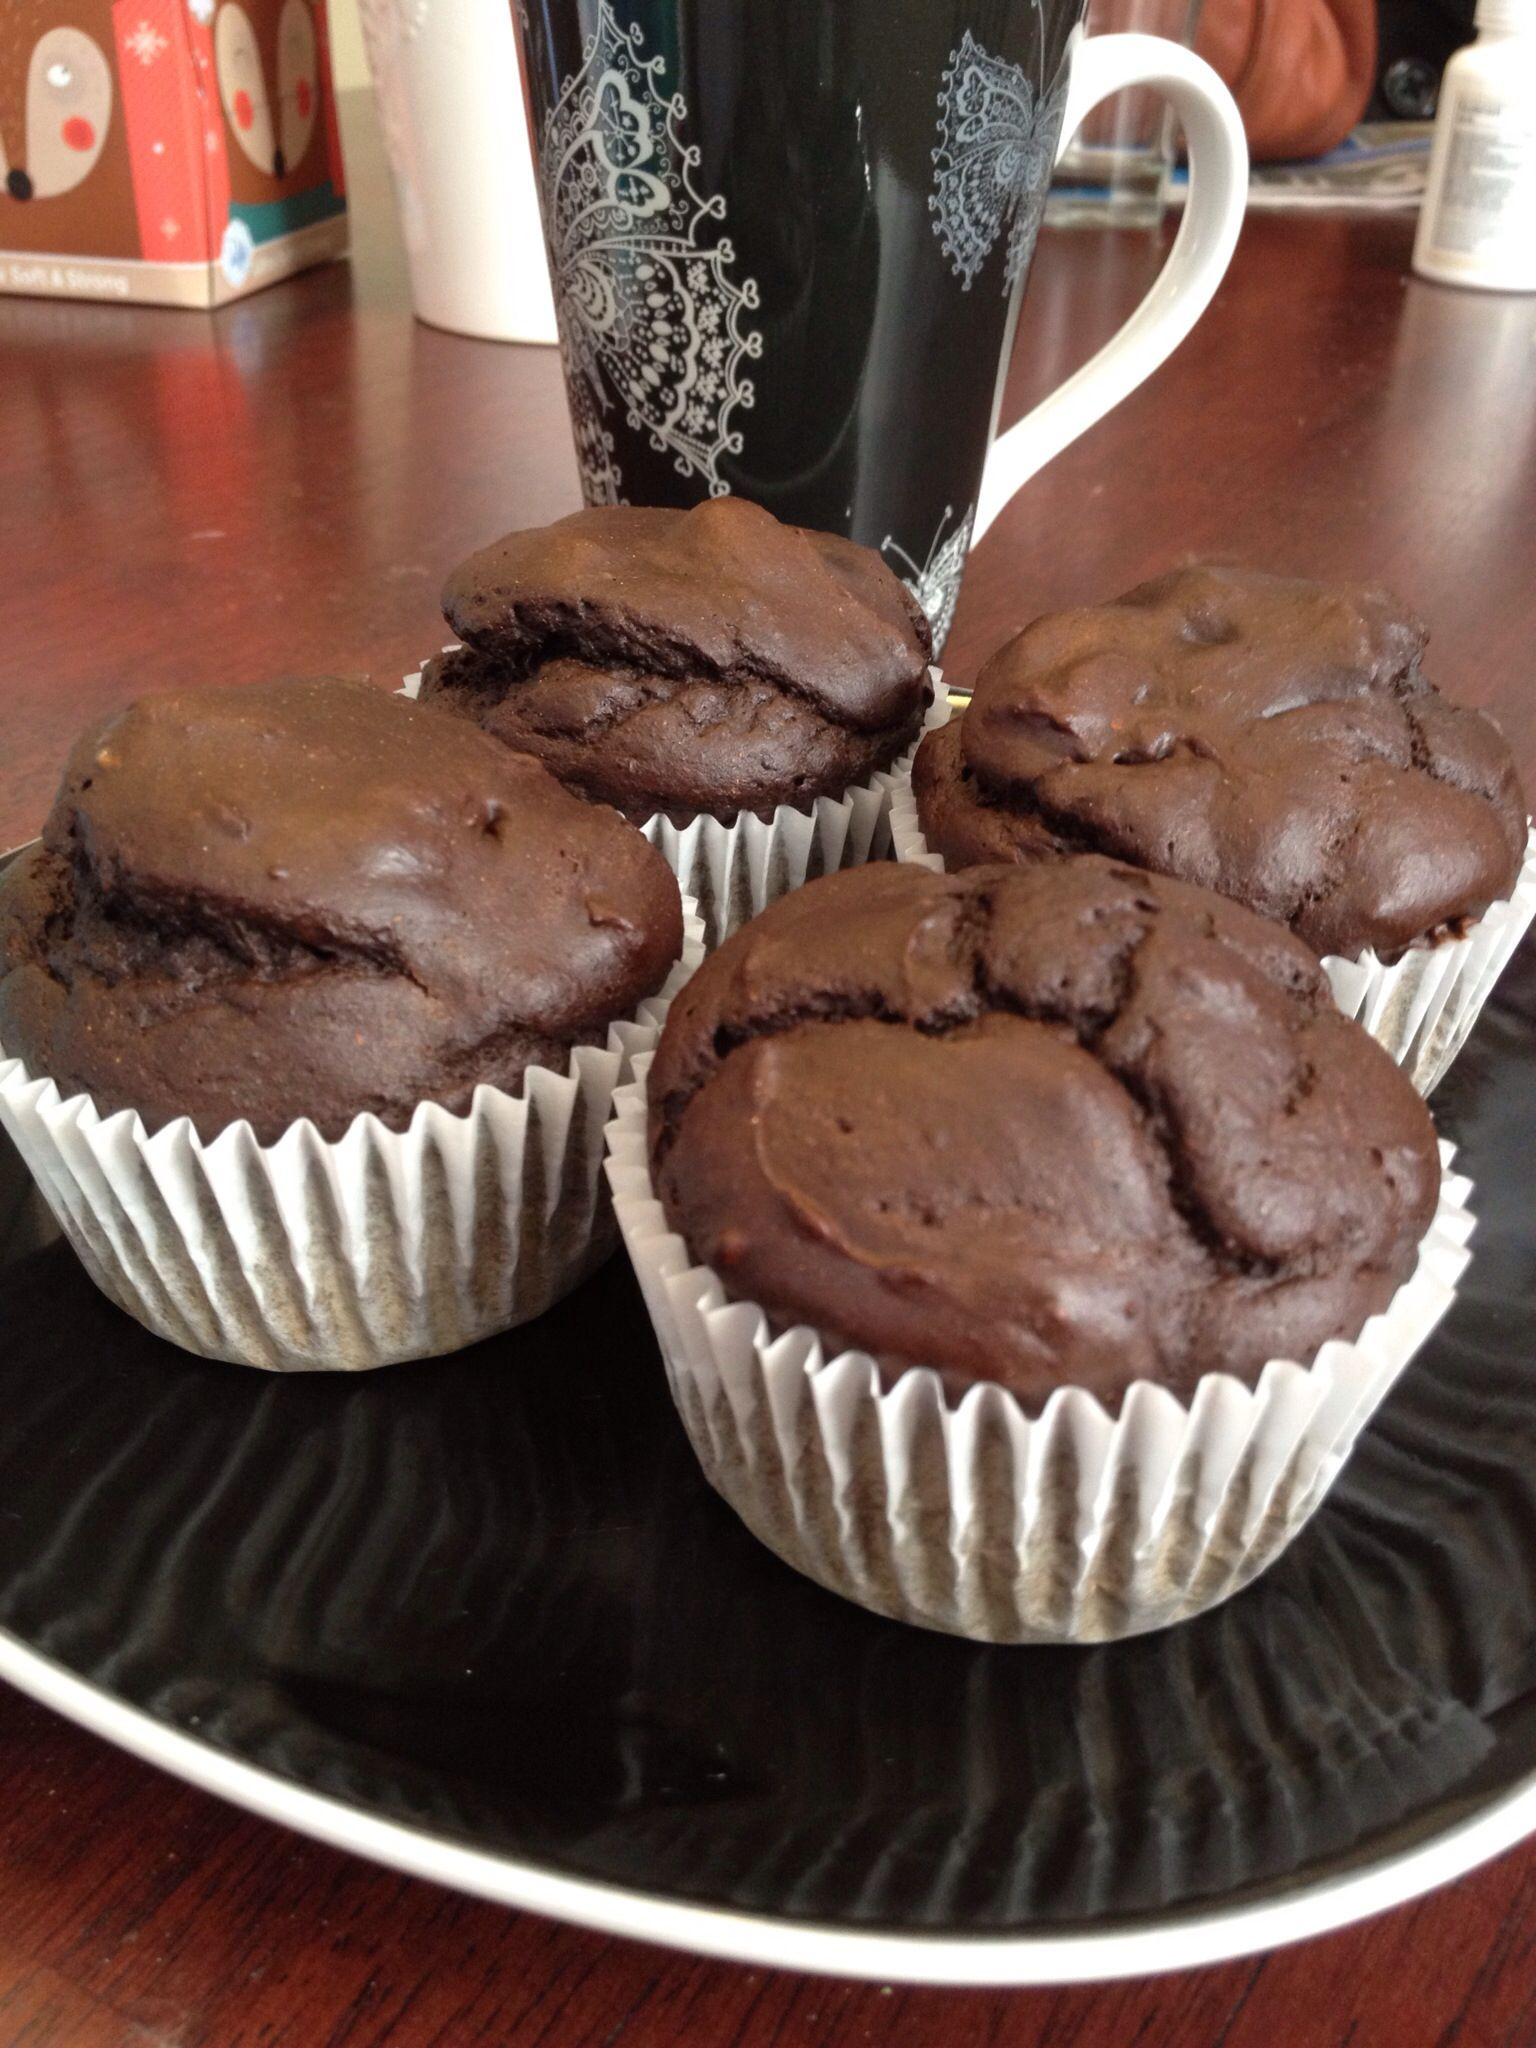 Protein Powder Desserts Low Carb
 Low Carb chocolate protein muffins